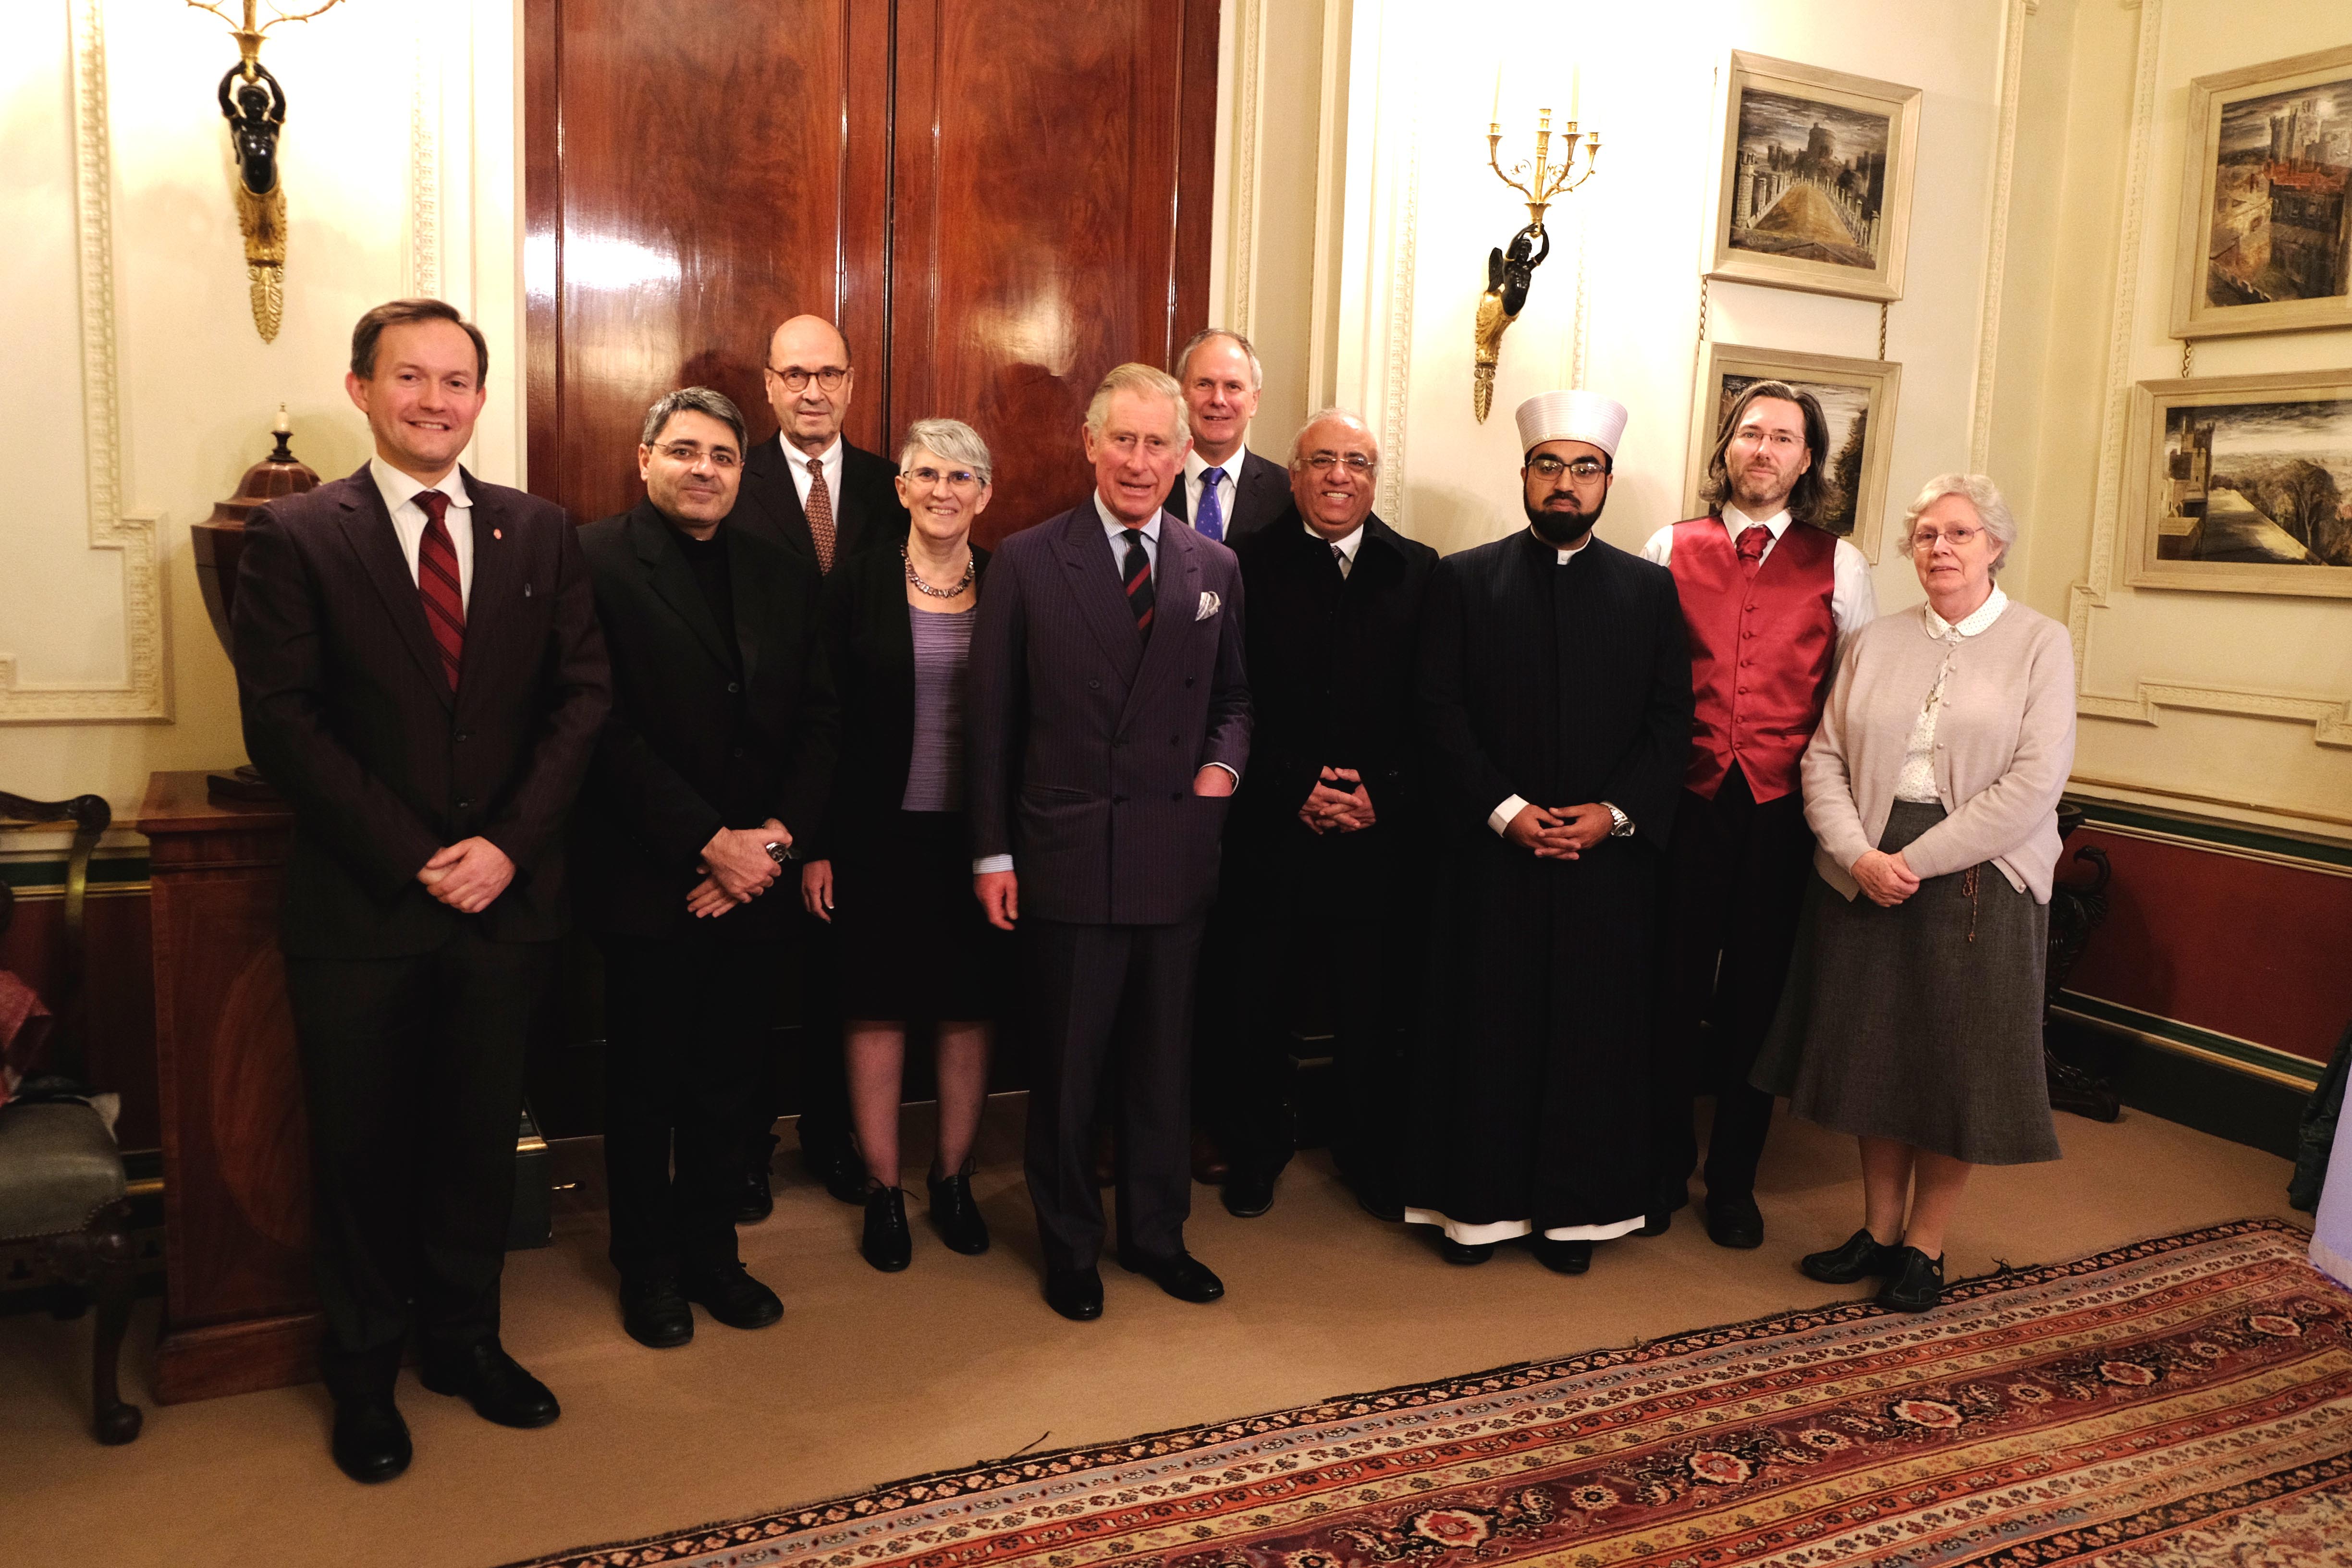 Presentation of the Aid to the Church in Need (ACN) Religious Freedom in the World 2016 Report to HRH The Prince of Wales, Clarence House, London Photo credit: ©Clarence House.